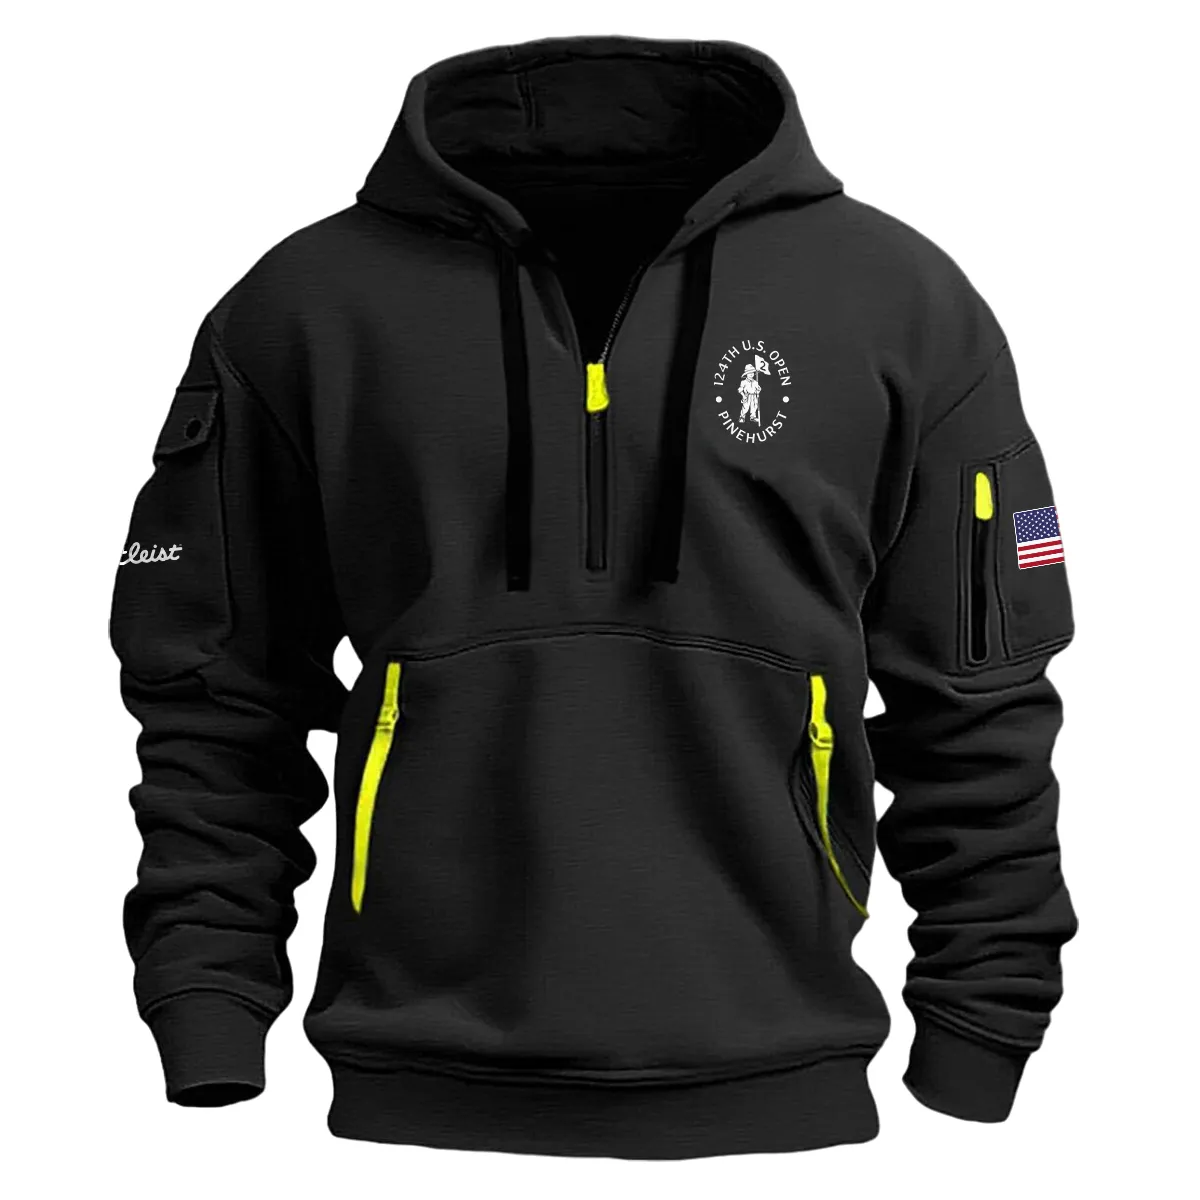 Titleist Fashion Hoodie Half Zipper 124th U.S. Open Pinehurst Gift For Fans For Father Husband